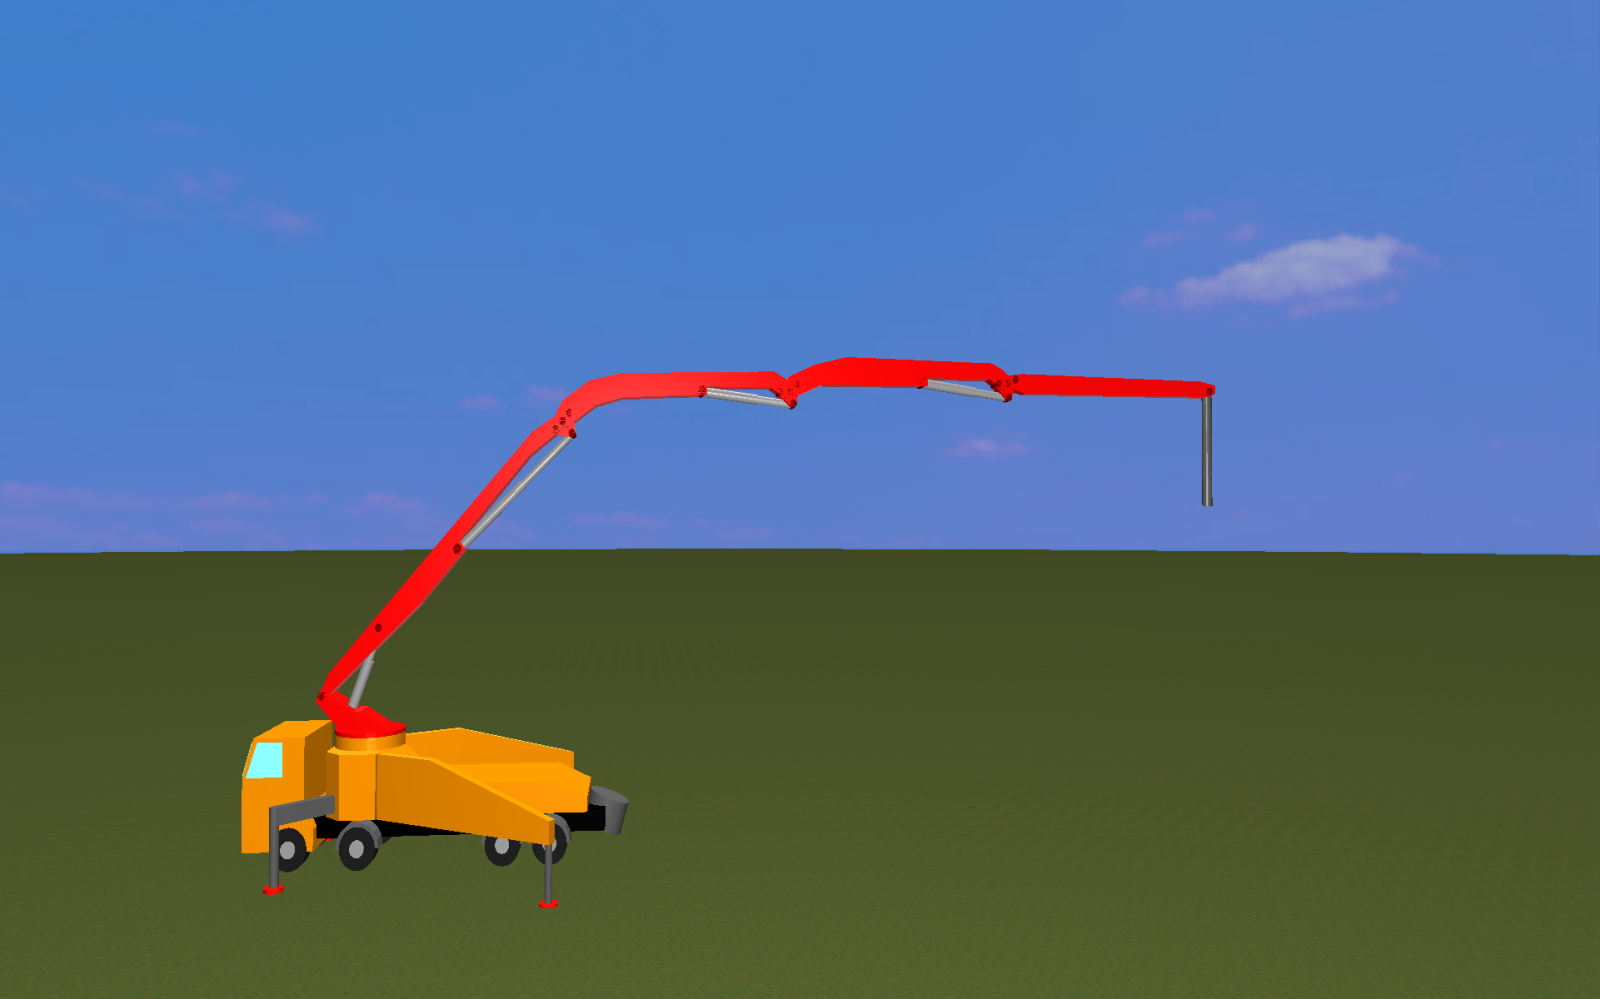 The digital twin in the animated graphical representation – here a concrete pump – responds to each signal it receives from the control unit.